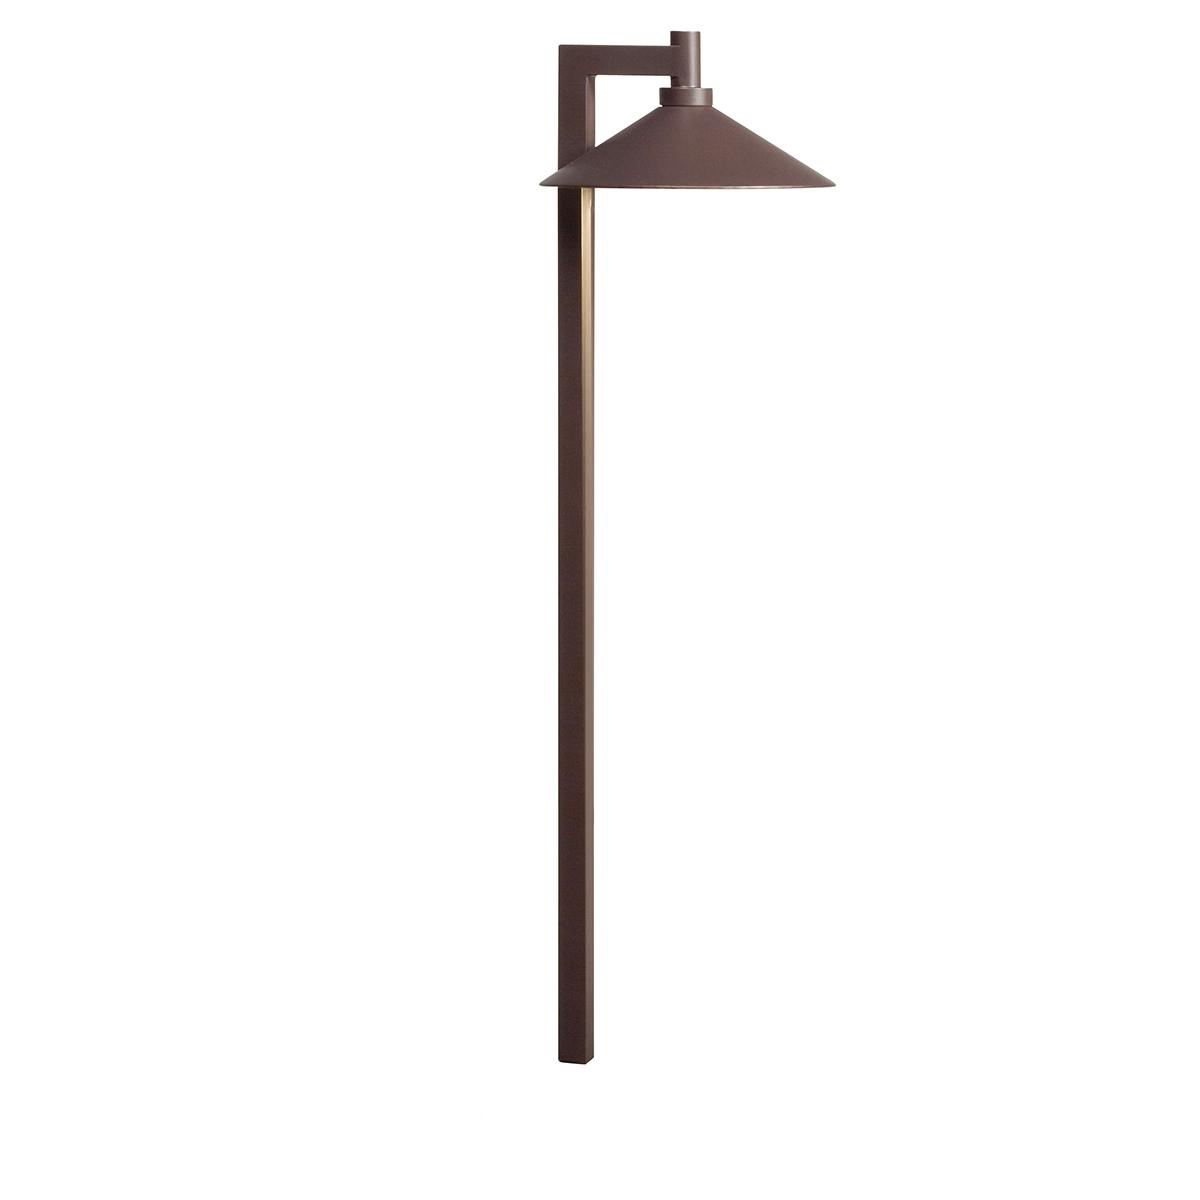 Ripley 3000K Path Light Textured Bronze on a white background